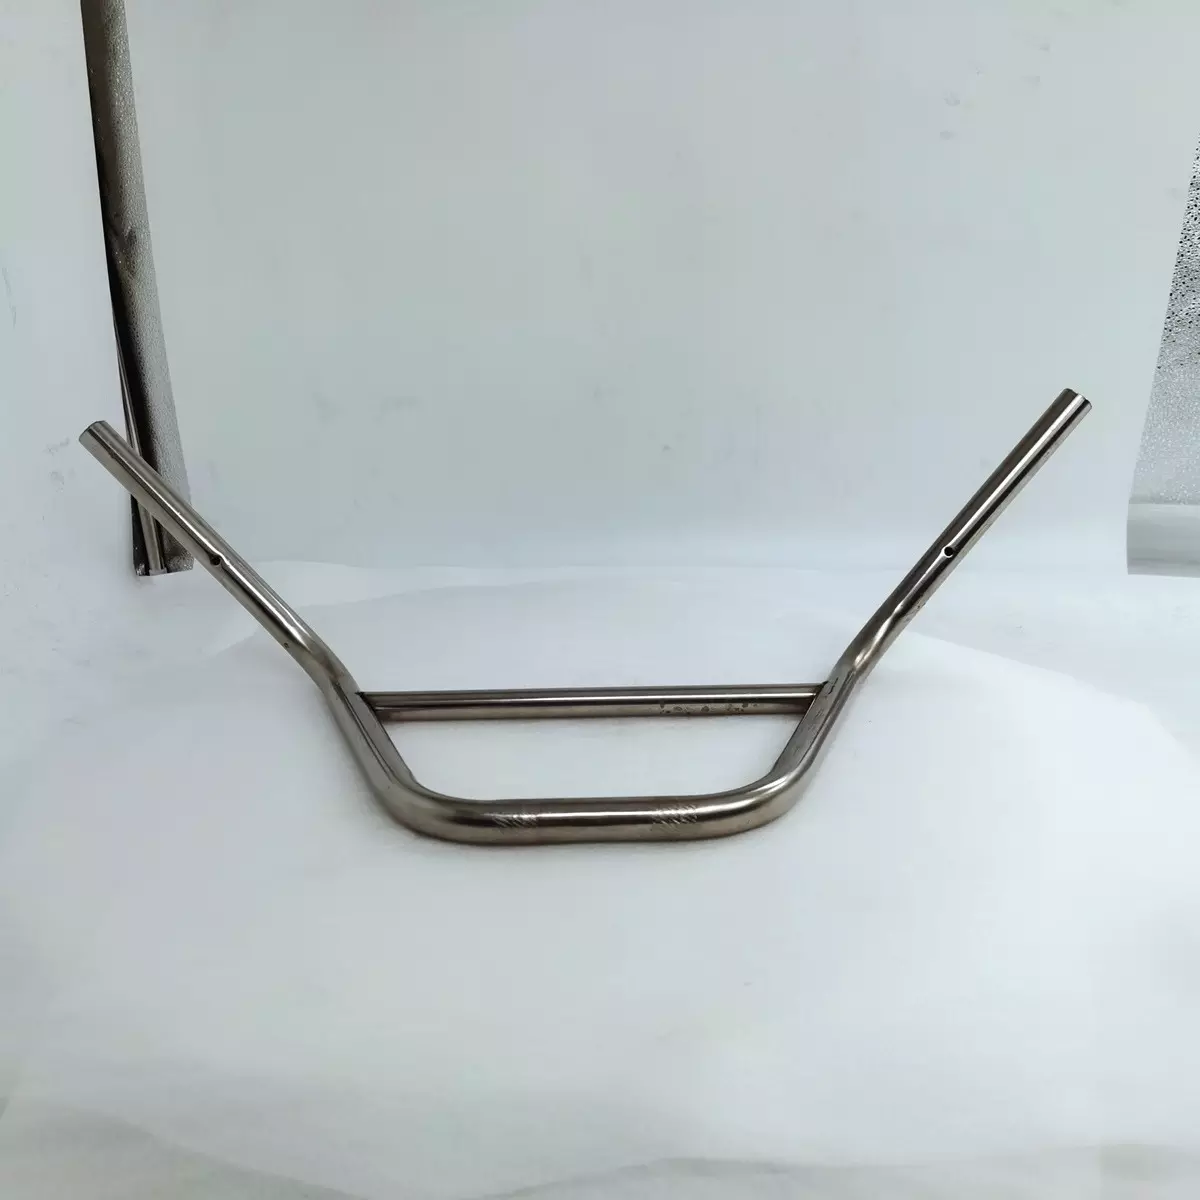 DAYANG hot selling all kinds of custom motorcycle parts factory direct sale tricycle stainless reinforce handlebar origin type